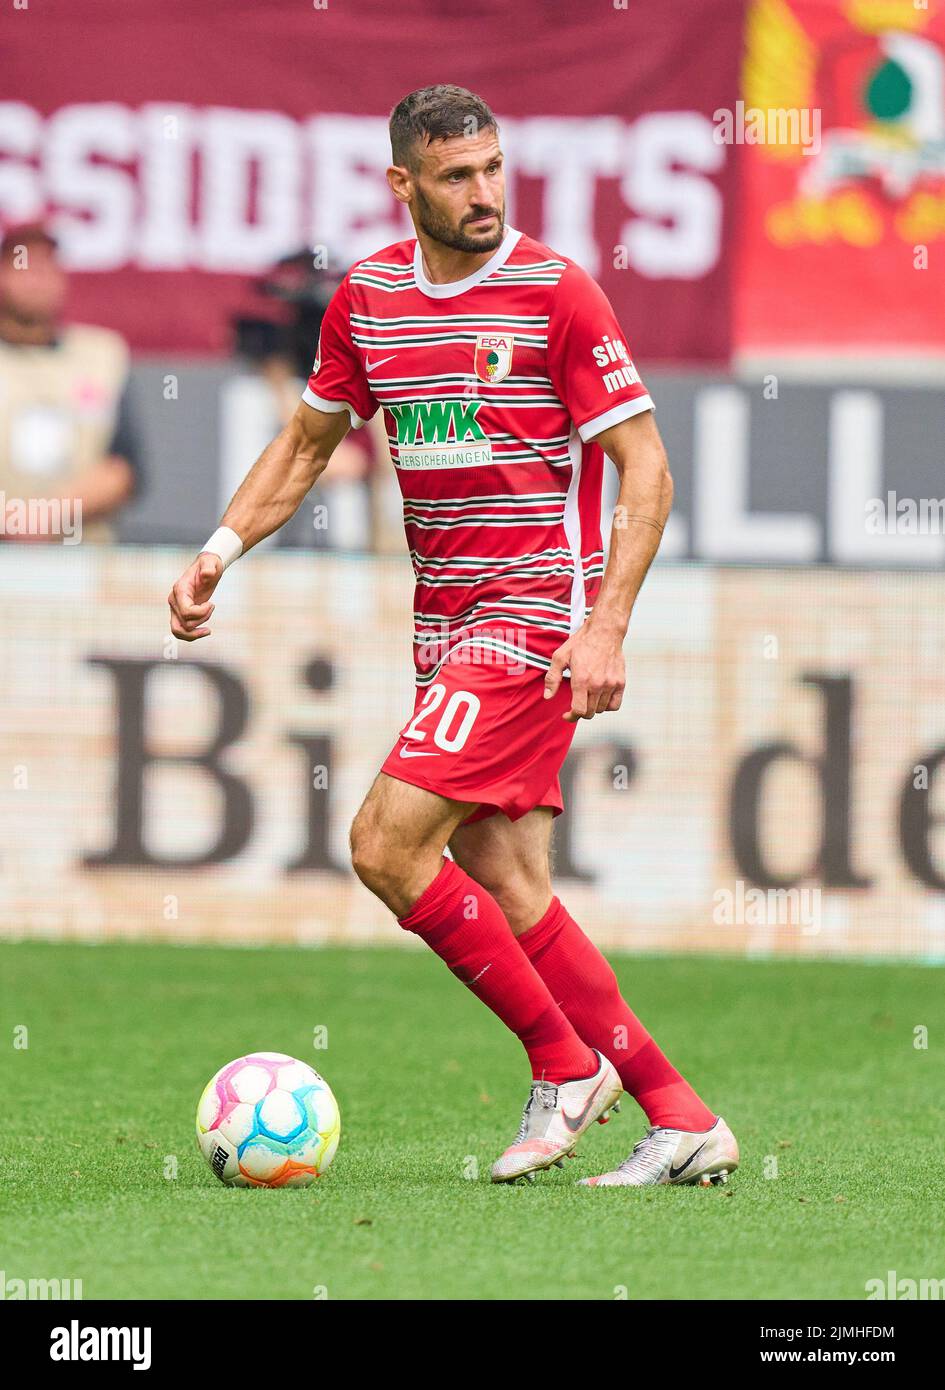 Daniel CALIGIURI, FCA 20  in the match FC AUGSBURG - SC FREIBURG 0-4 1.German Football League on Aug 06, 2022 in Augsburg, Germany. Season 2022/2023, matchday 1, 1.Bundesliga, FCB, Munich, 1.Spieltag © Peter Schatz / Alamy Live News    - DFL REGULATIONS PROHIBIT ANY USE OF PHOTOGRAPHS as IMAGE SEQUENCES and/or QUASI-VIDEO - Stock Photo